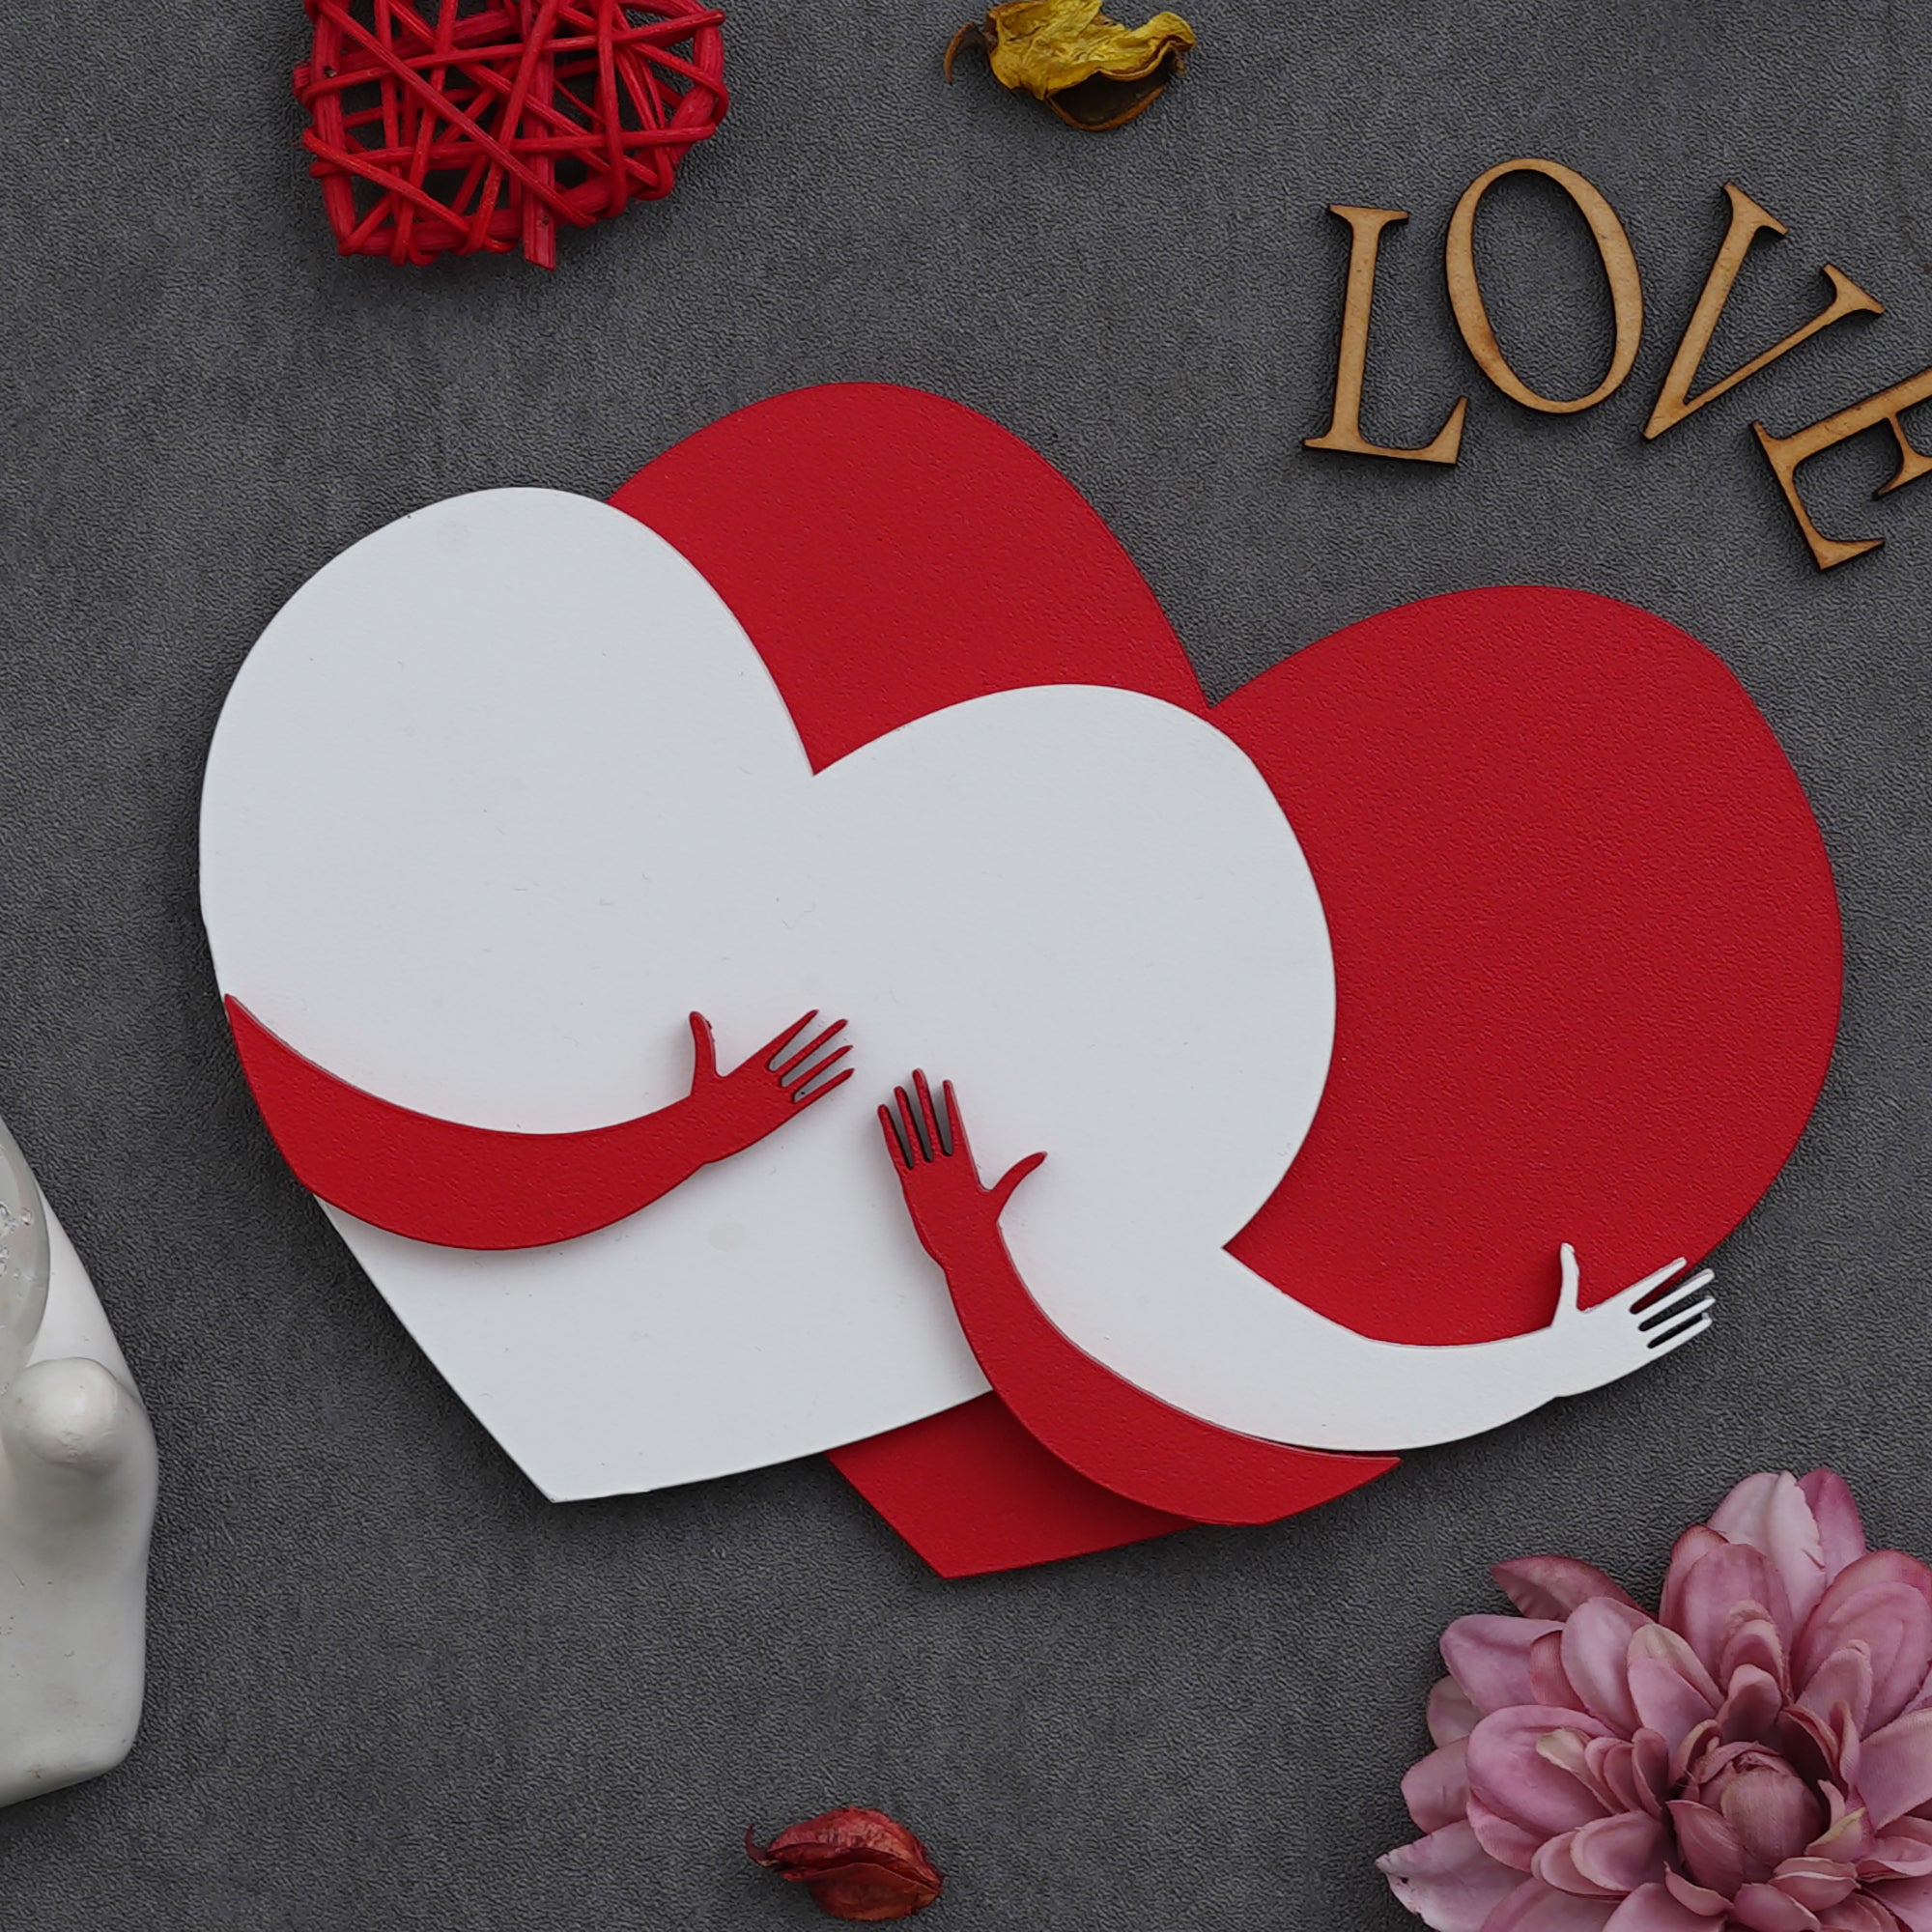 Valentine Combo of Pack of 8 Love Gift Cards, Red and White Heart Hugging Each Other Gift Set, Red Roses Bouquet and White, Red Teddy Bear Valentine's Rectangle Shaped Gift Box 3